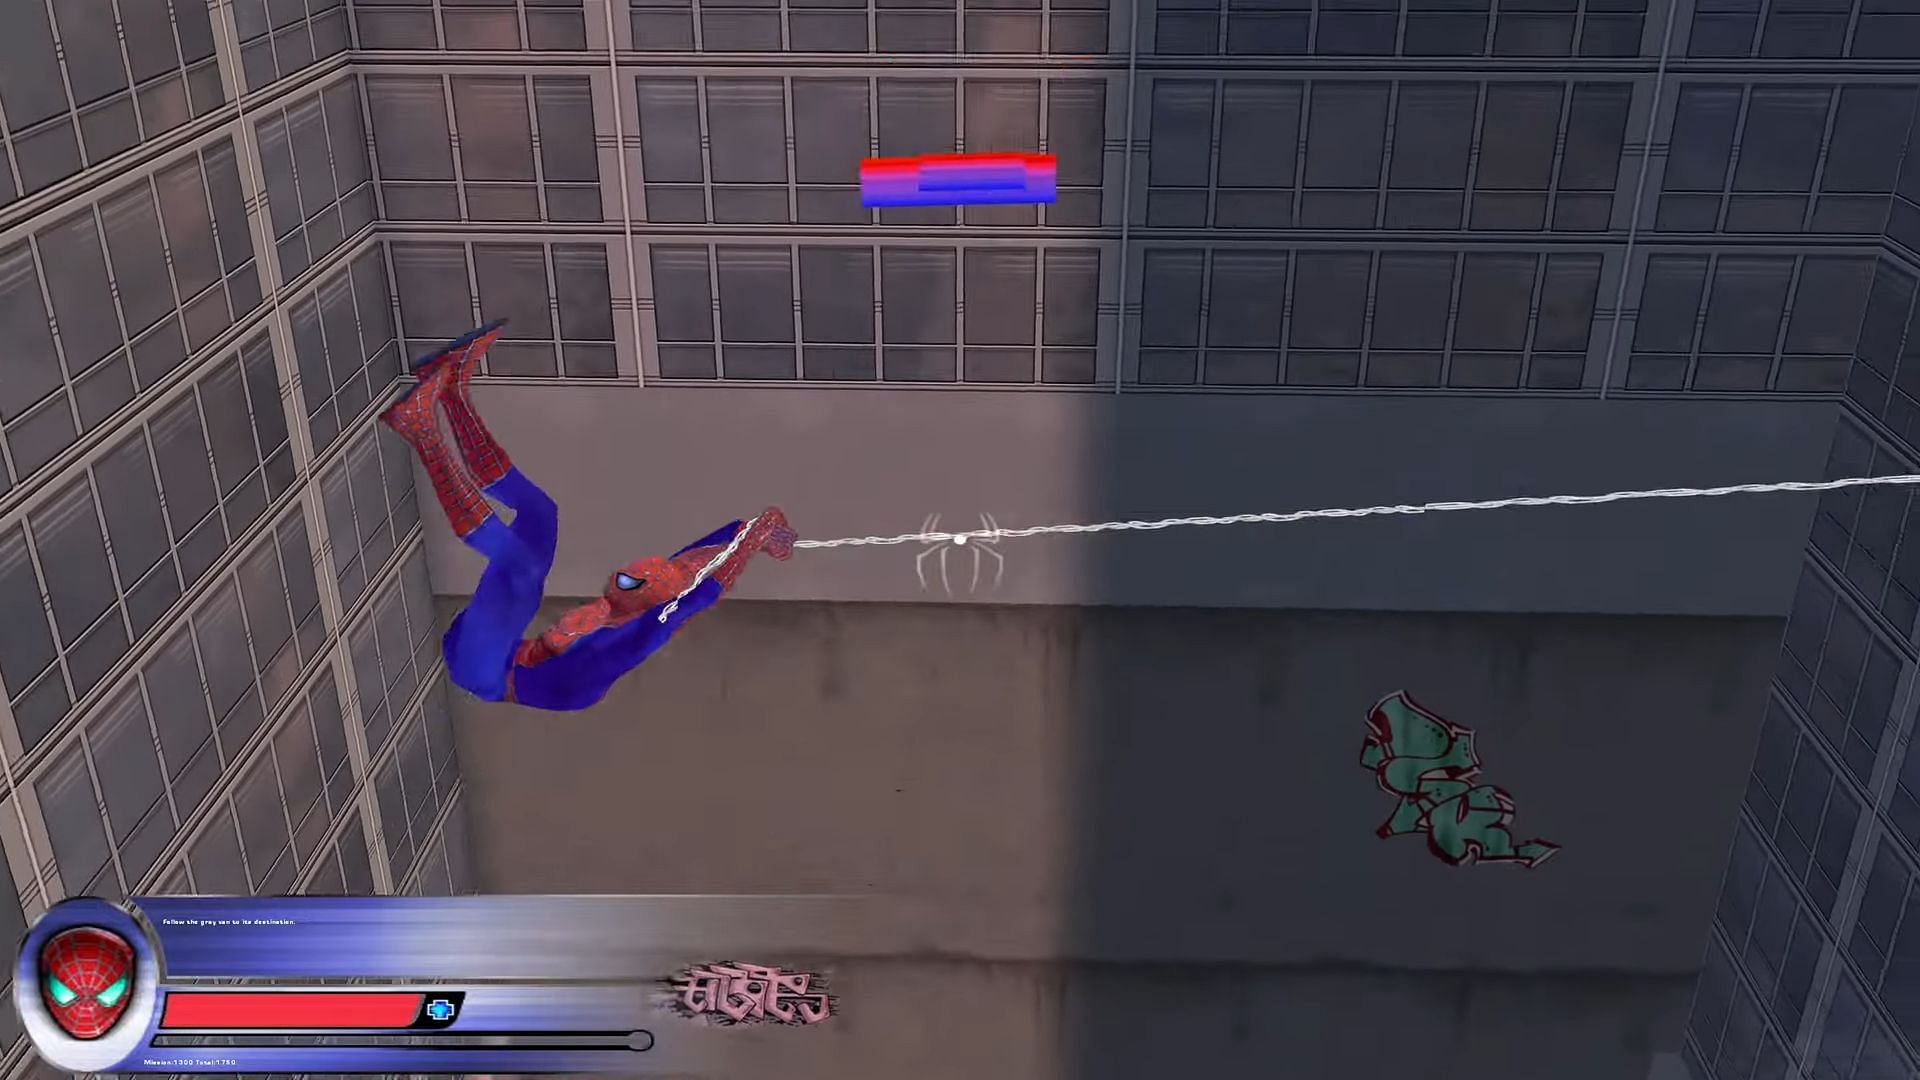 This game was based on the second Sam Raimi Spider-Man movie (Image via Activision)